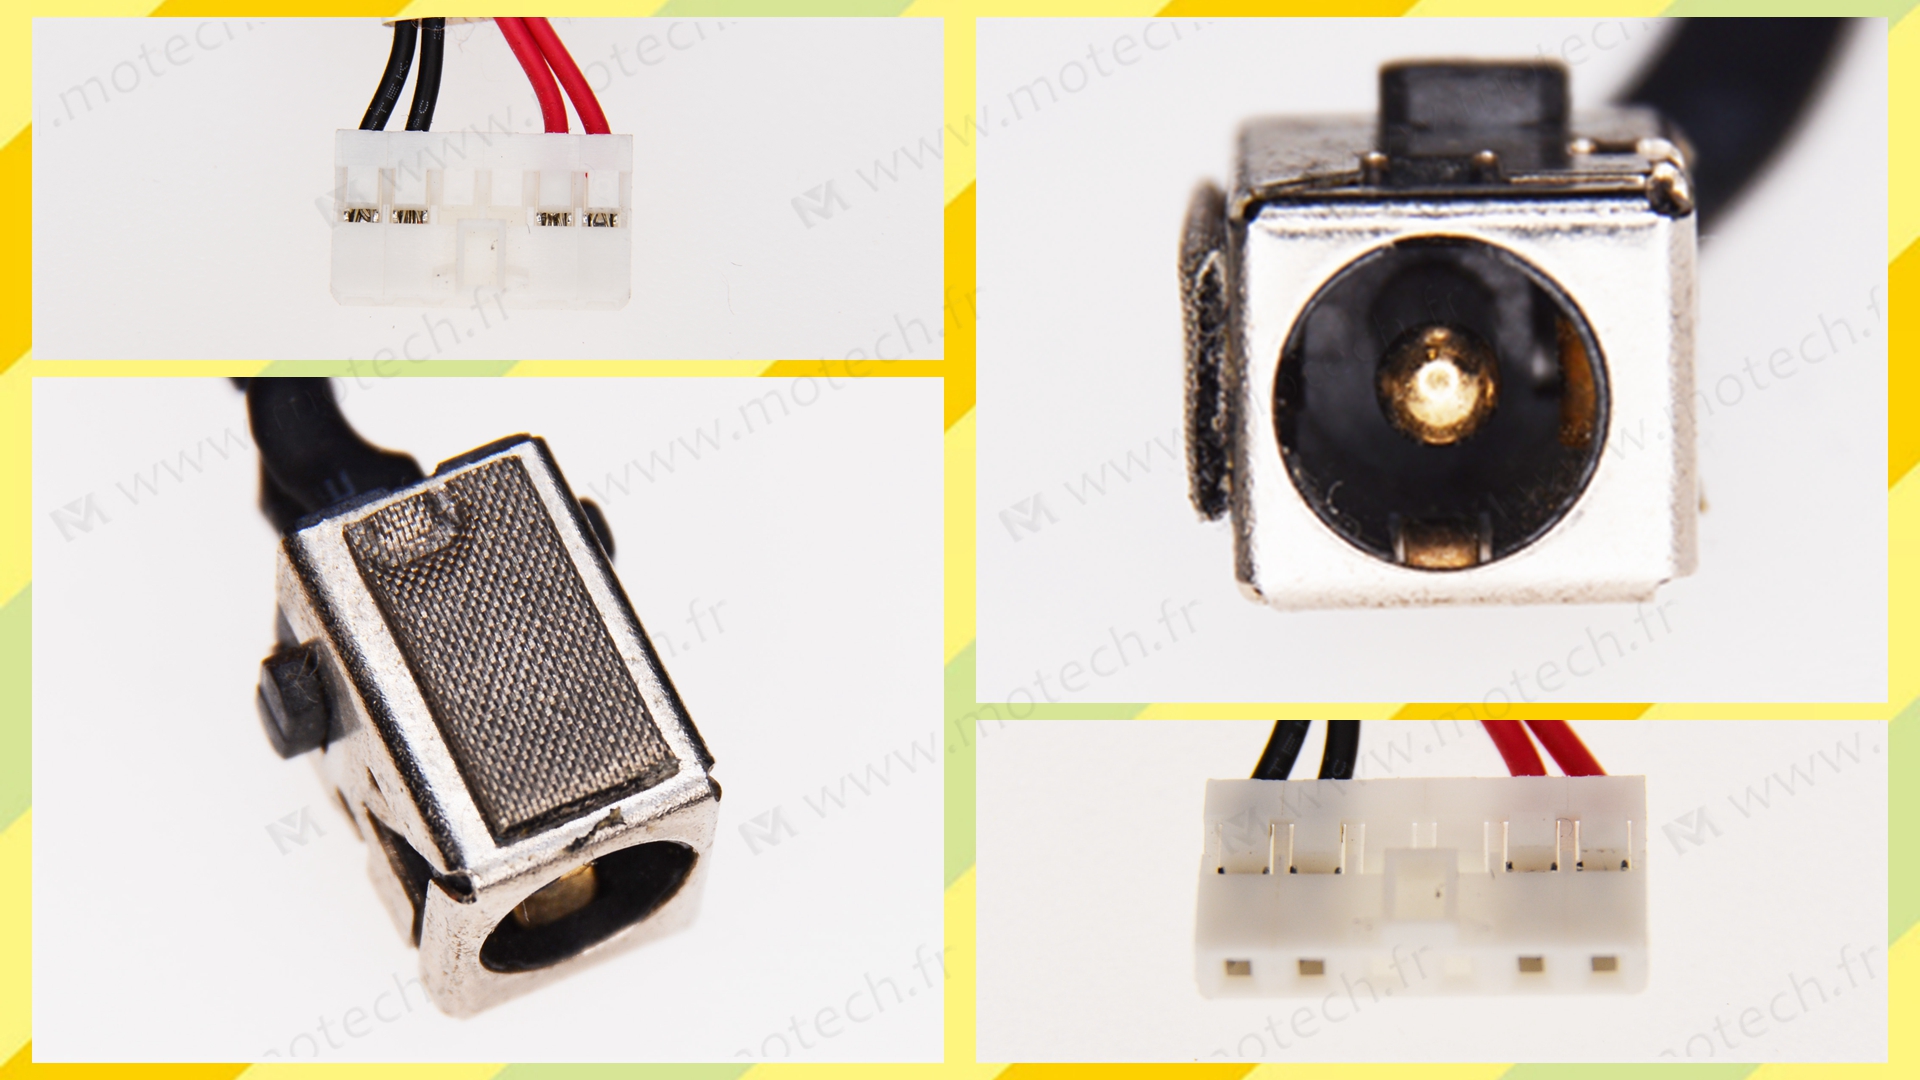 Asus A75A charging connector, Asus A75A DC Power Jack, Asus A75A DC IN Cable, Asus A75A Power Jack, Asus A75A plug, Asus A75A Jack socket, Asus A75A connecteur de charge, 